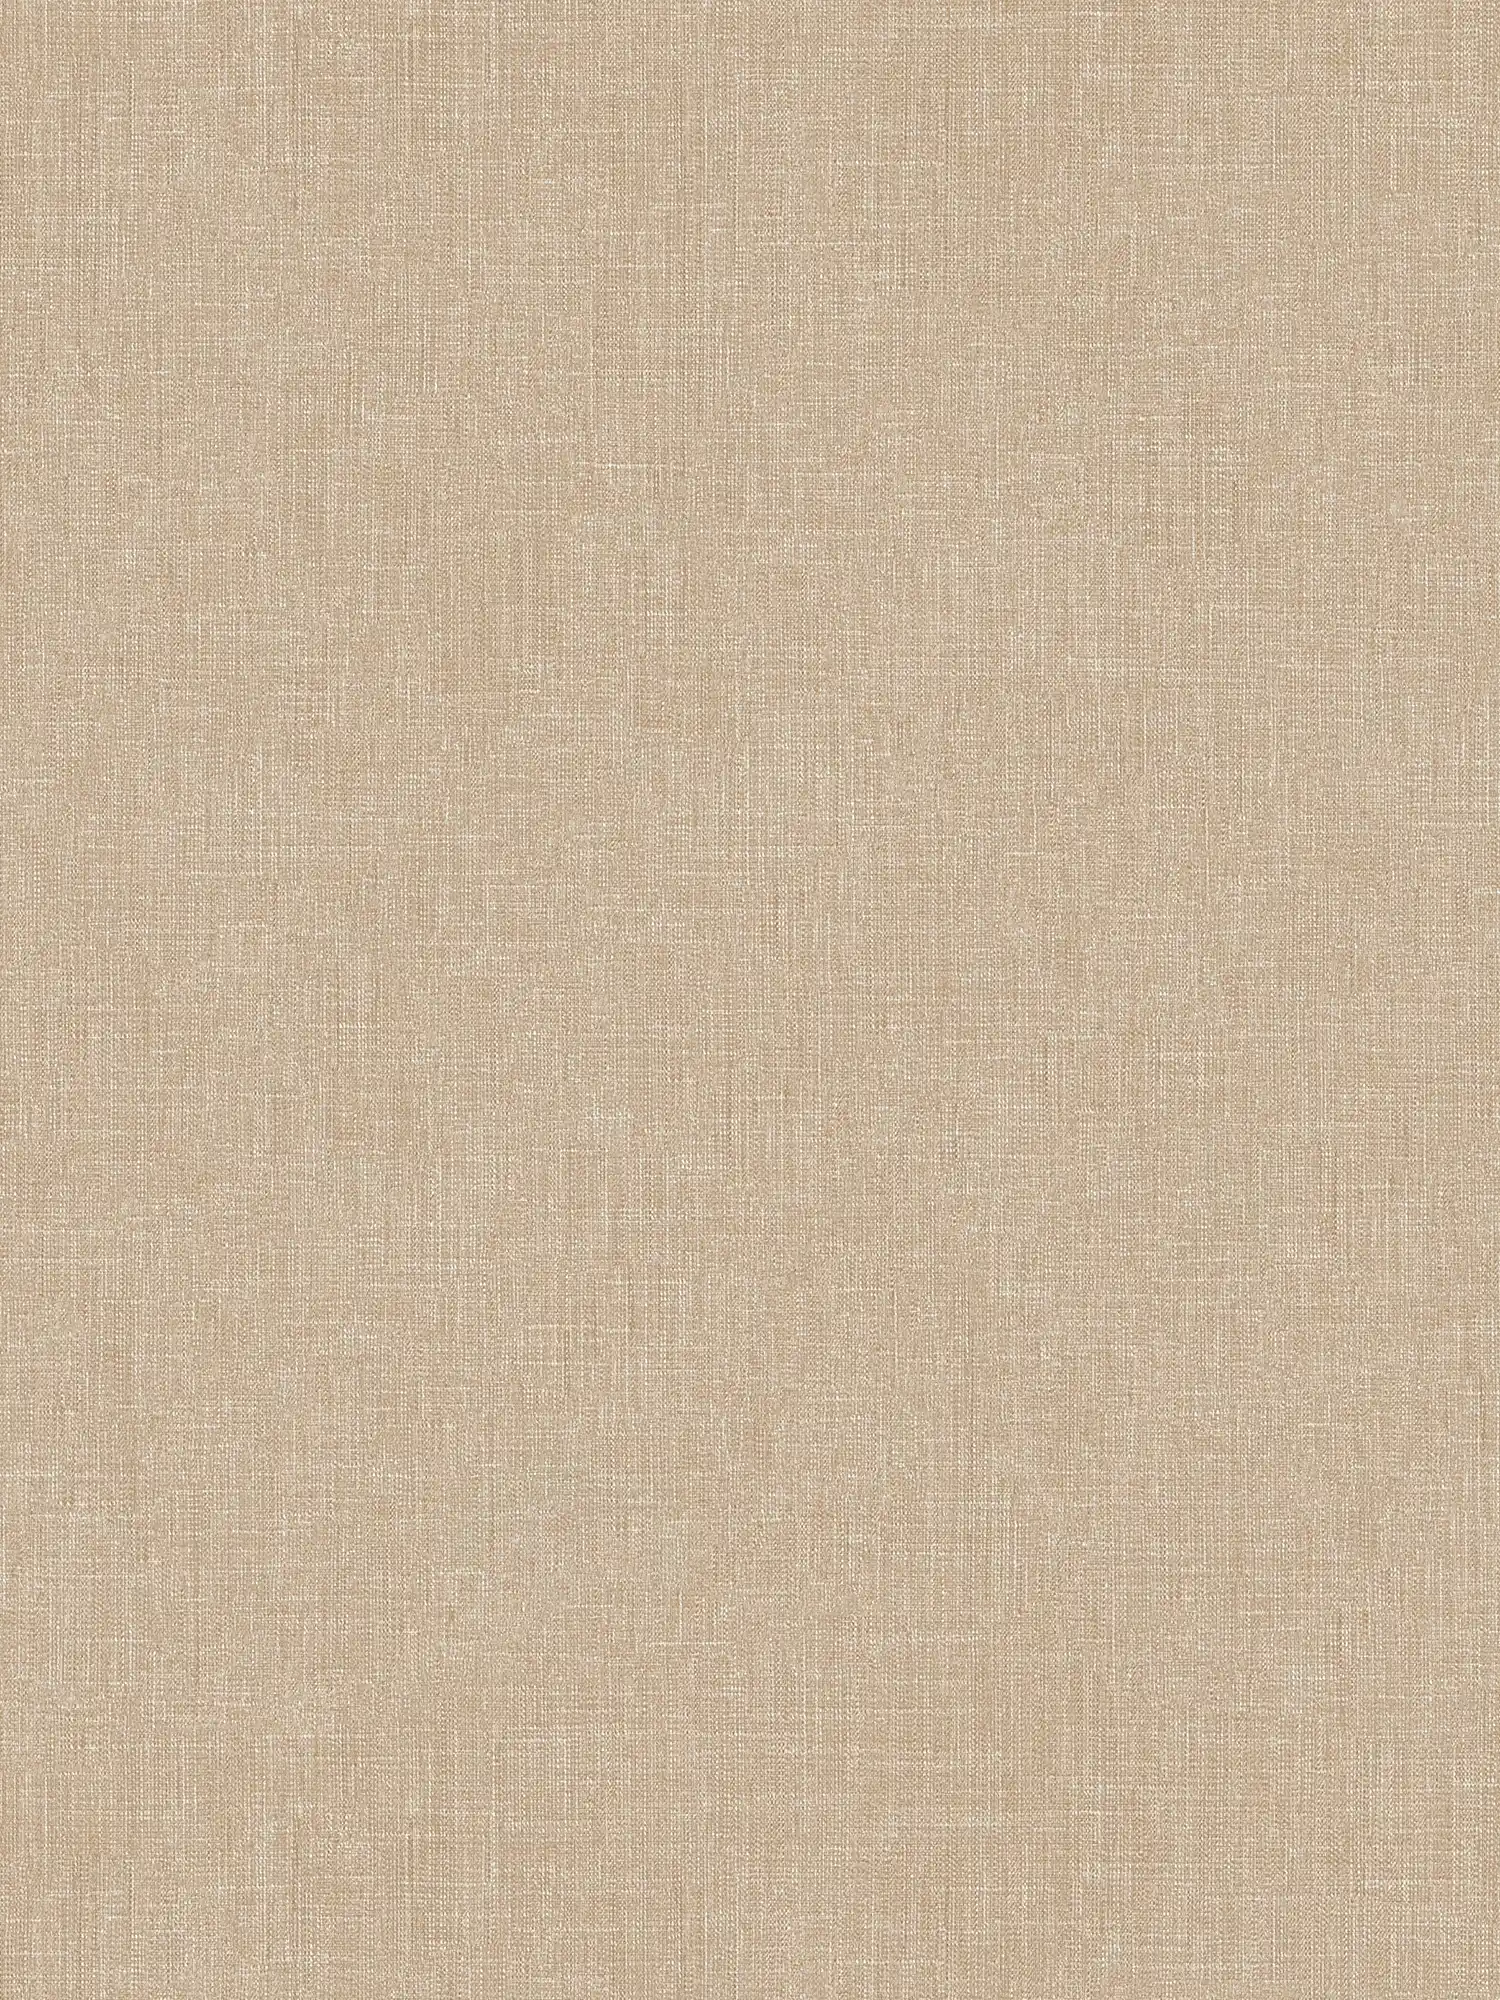 Wallpaper with textile structure - brown
